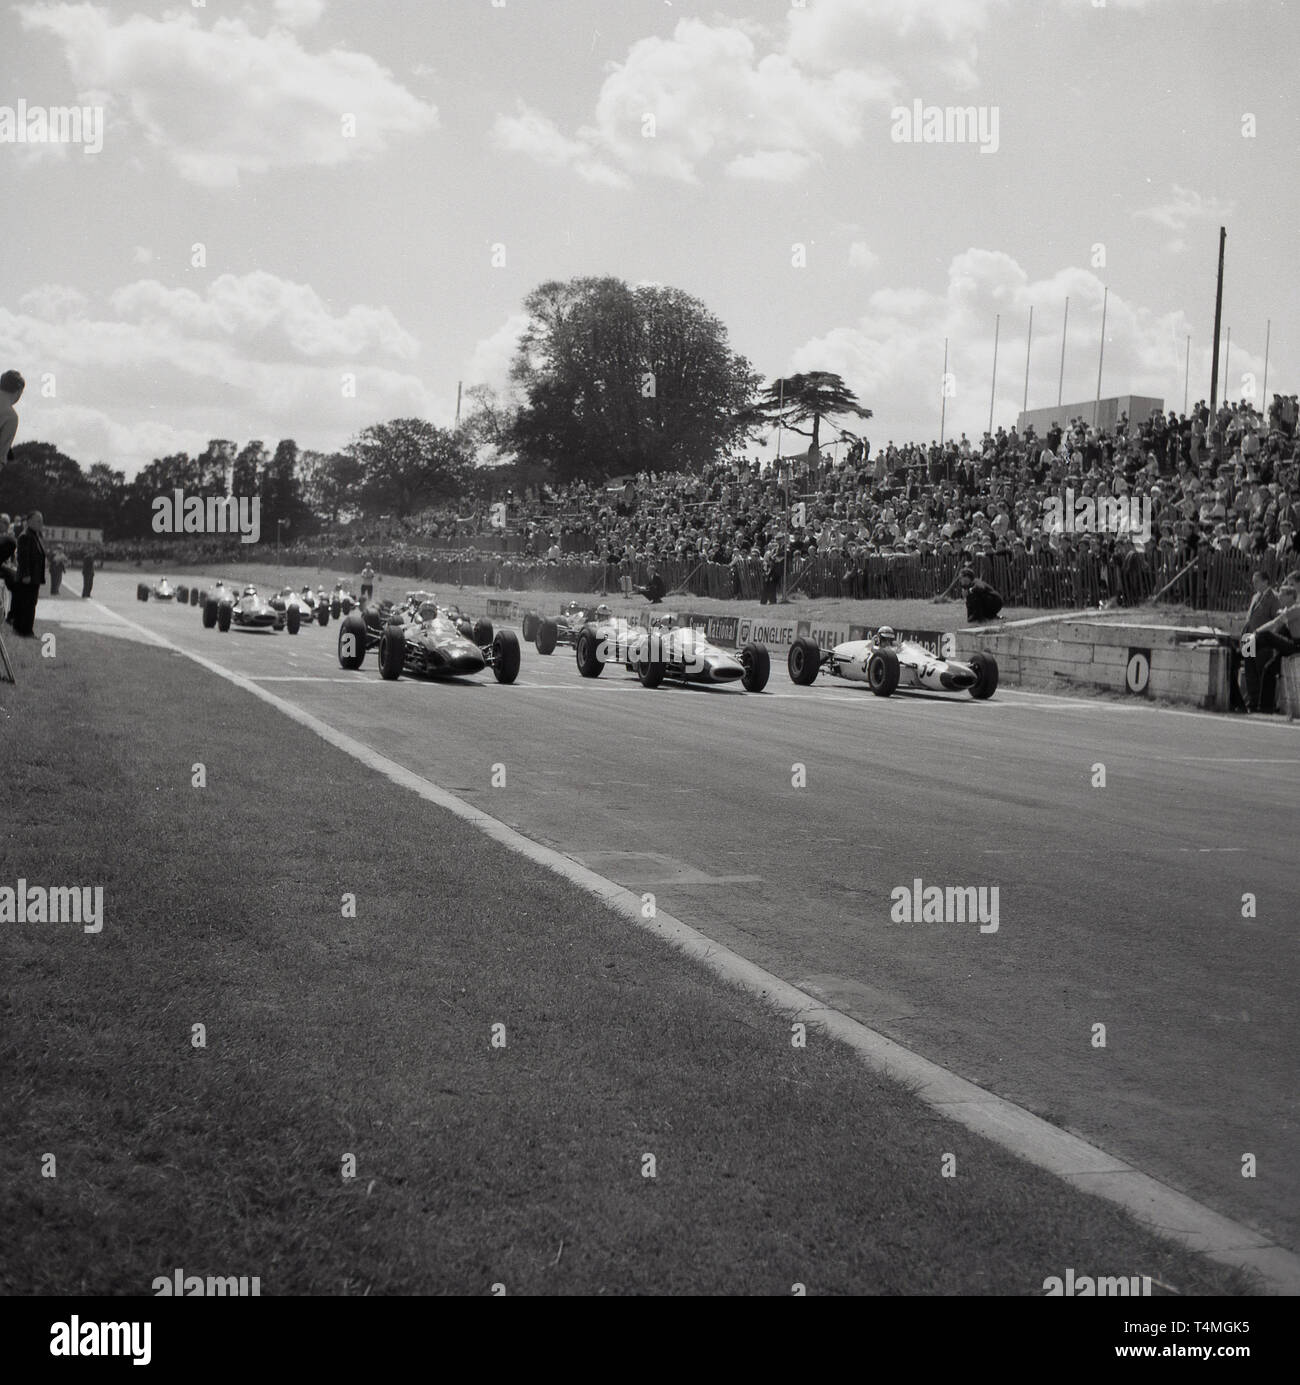 1960s, historical, motor racing at the Crystal Palace race circuit in South London, London, England, UK, drivers and cars on the track, in  position on the start grid the race. Stock Photo